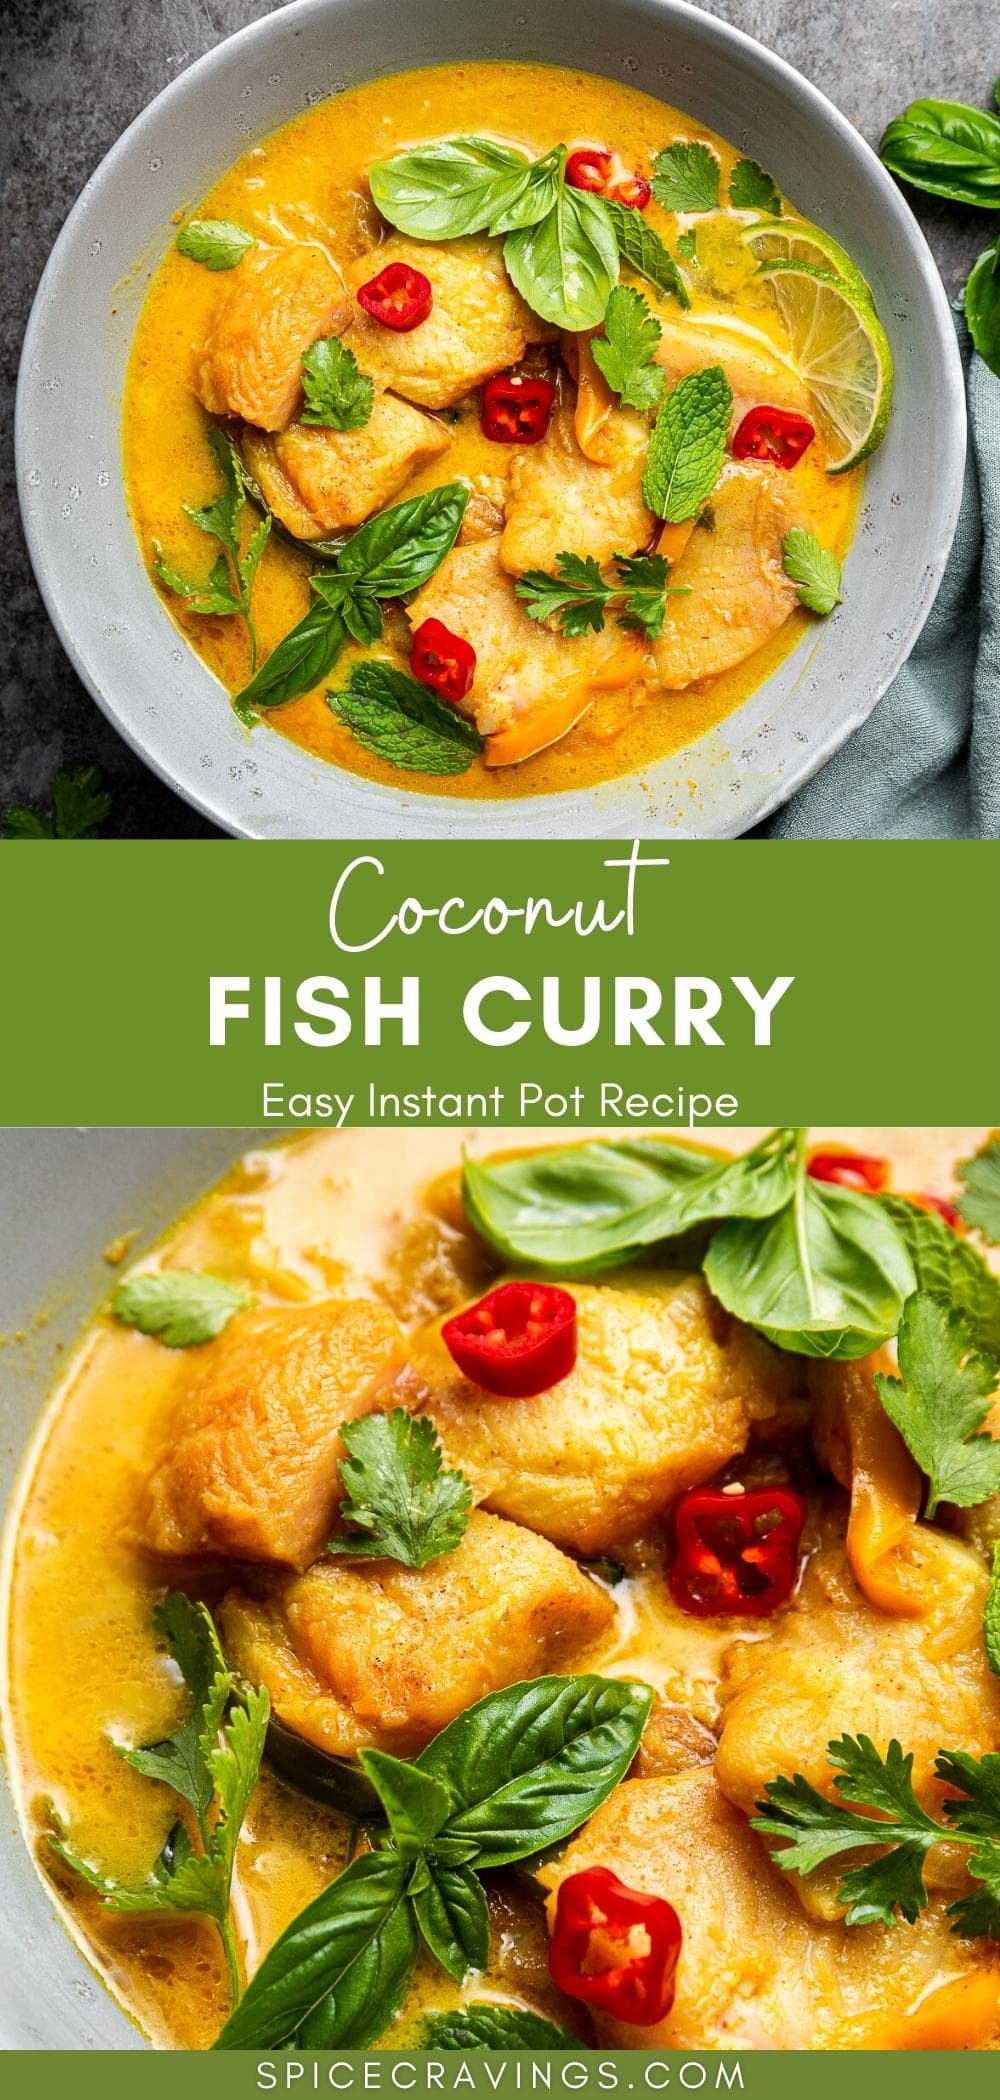 Coconut Fish Curry - Spice Cravings